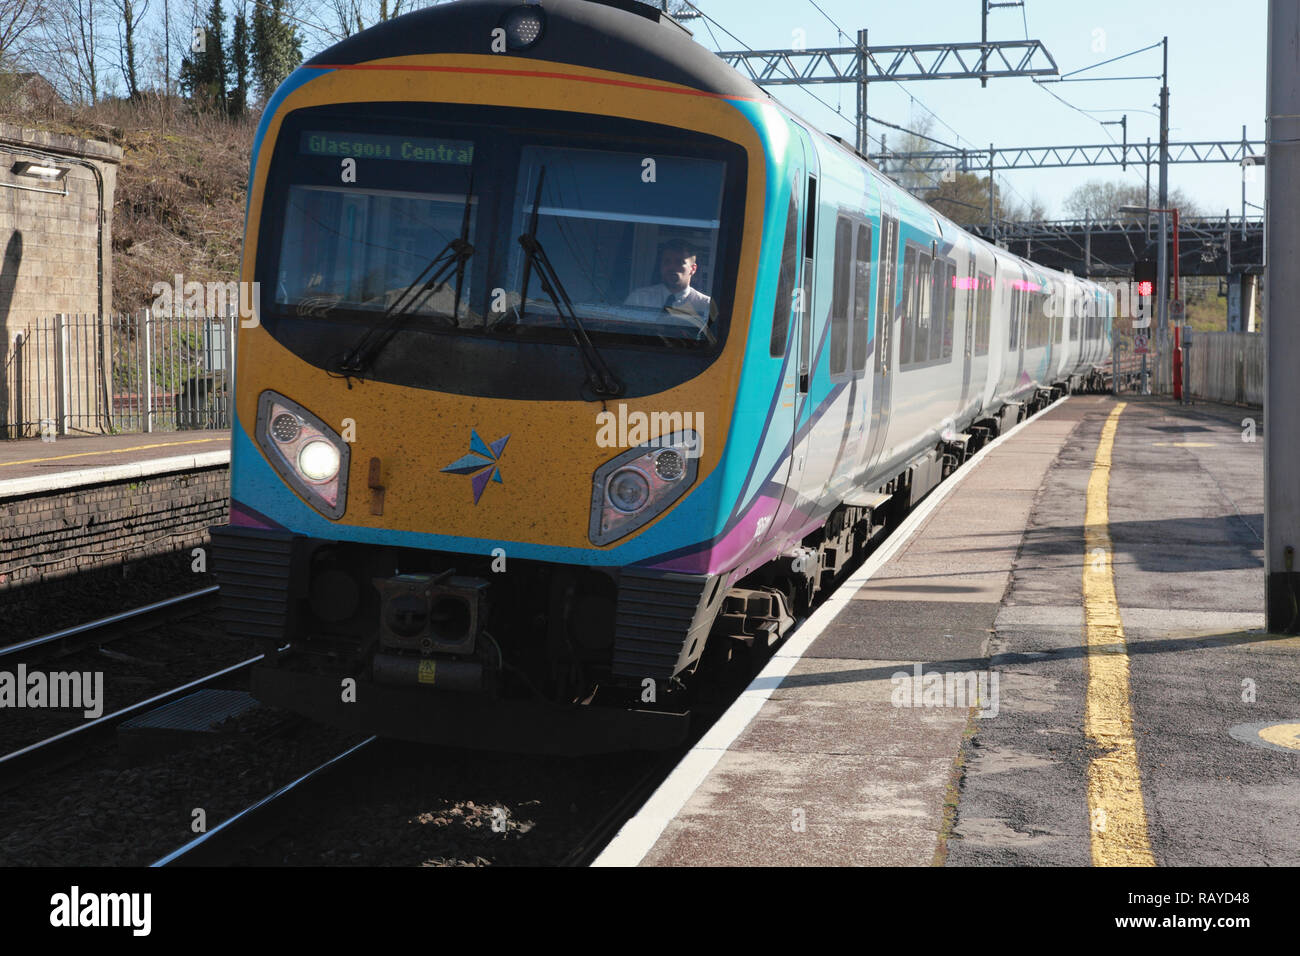 A TransPennine Express train approaching Platform 2 at Oxenholme station in the Lake District, Cumbria, northern England Stock Photo